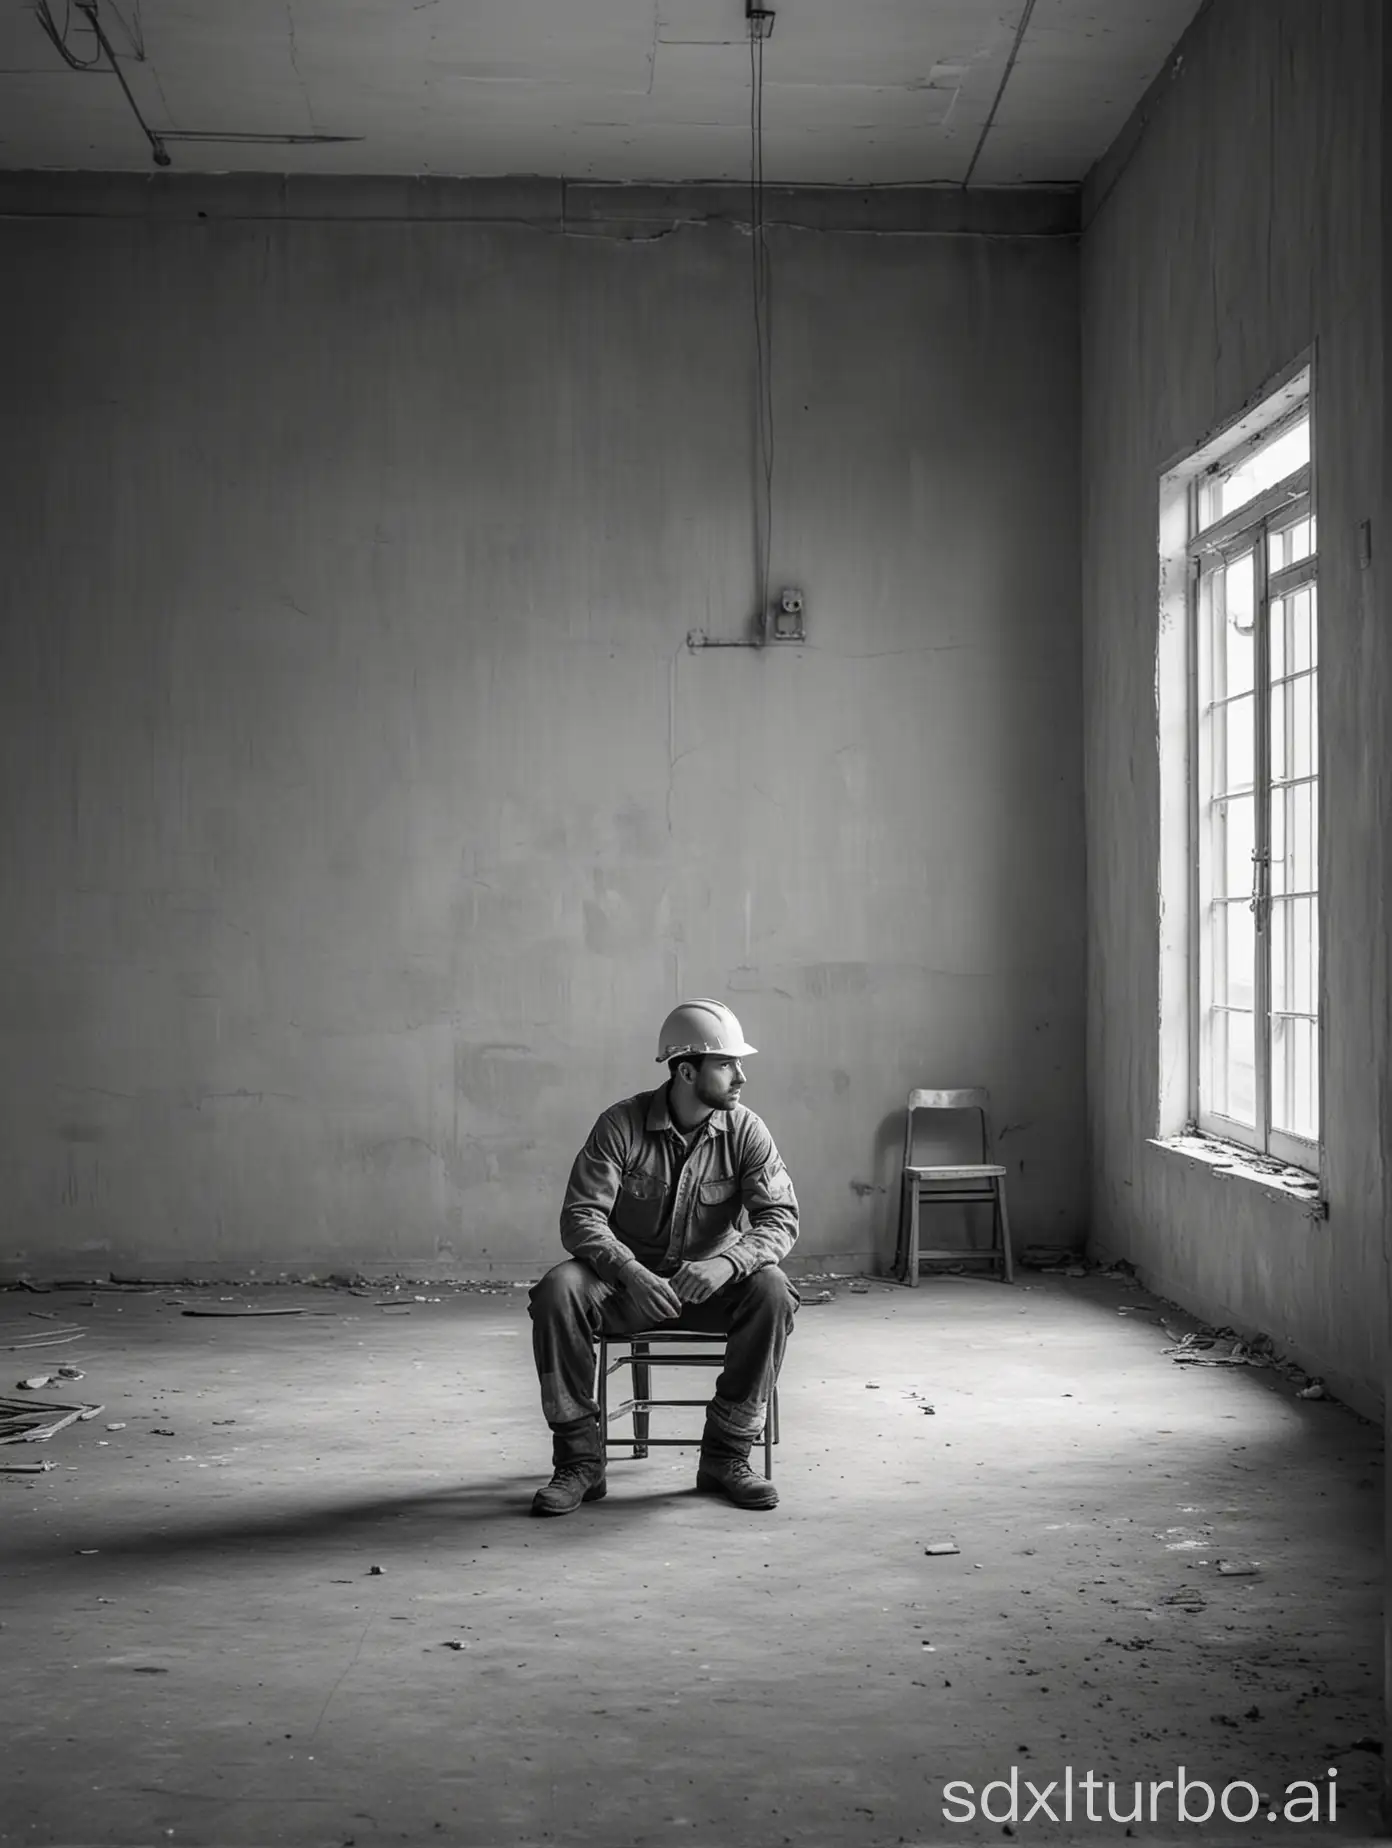 Solitary-Engineer-Contemplating-in-Monochrome-Room